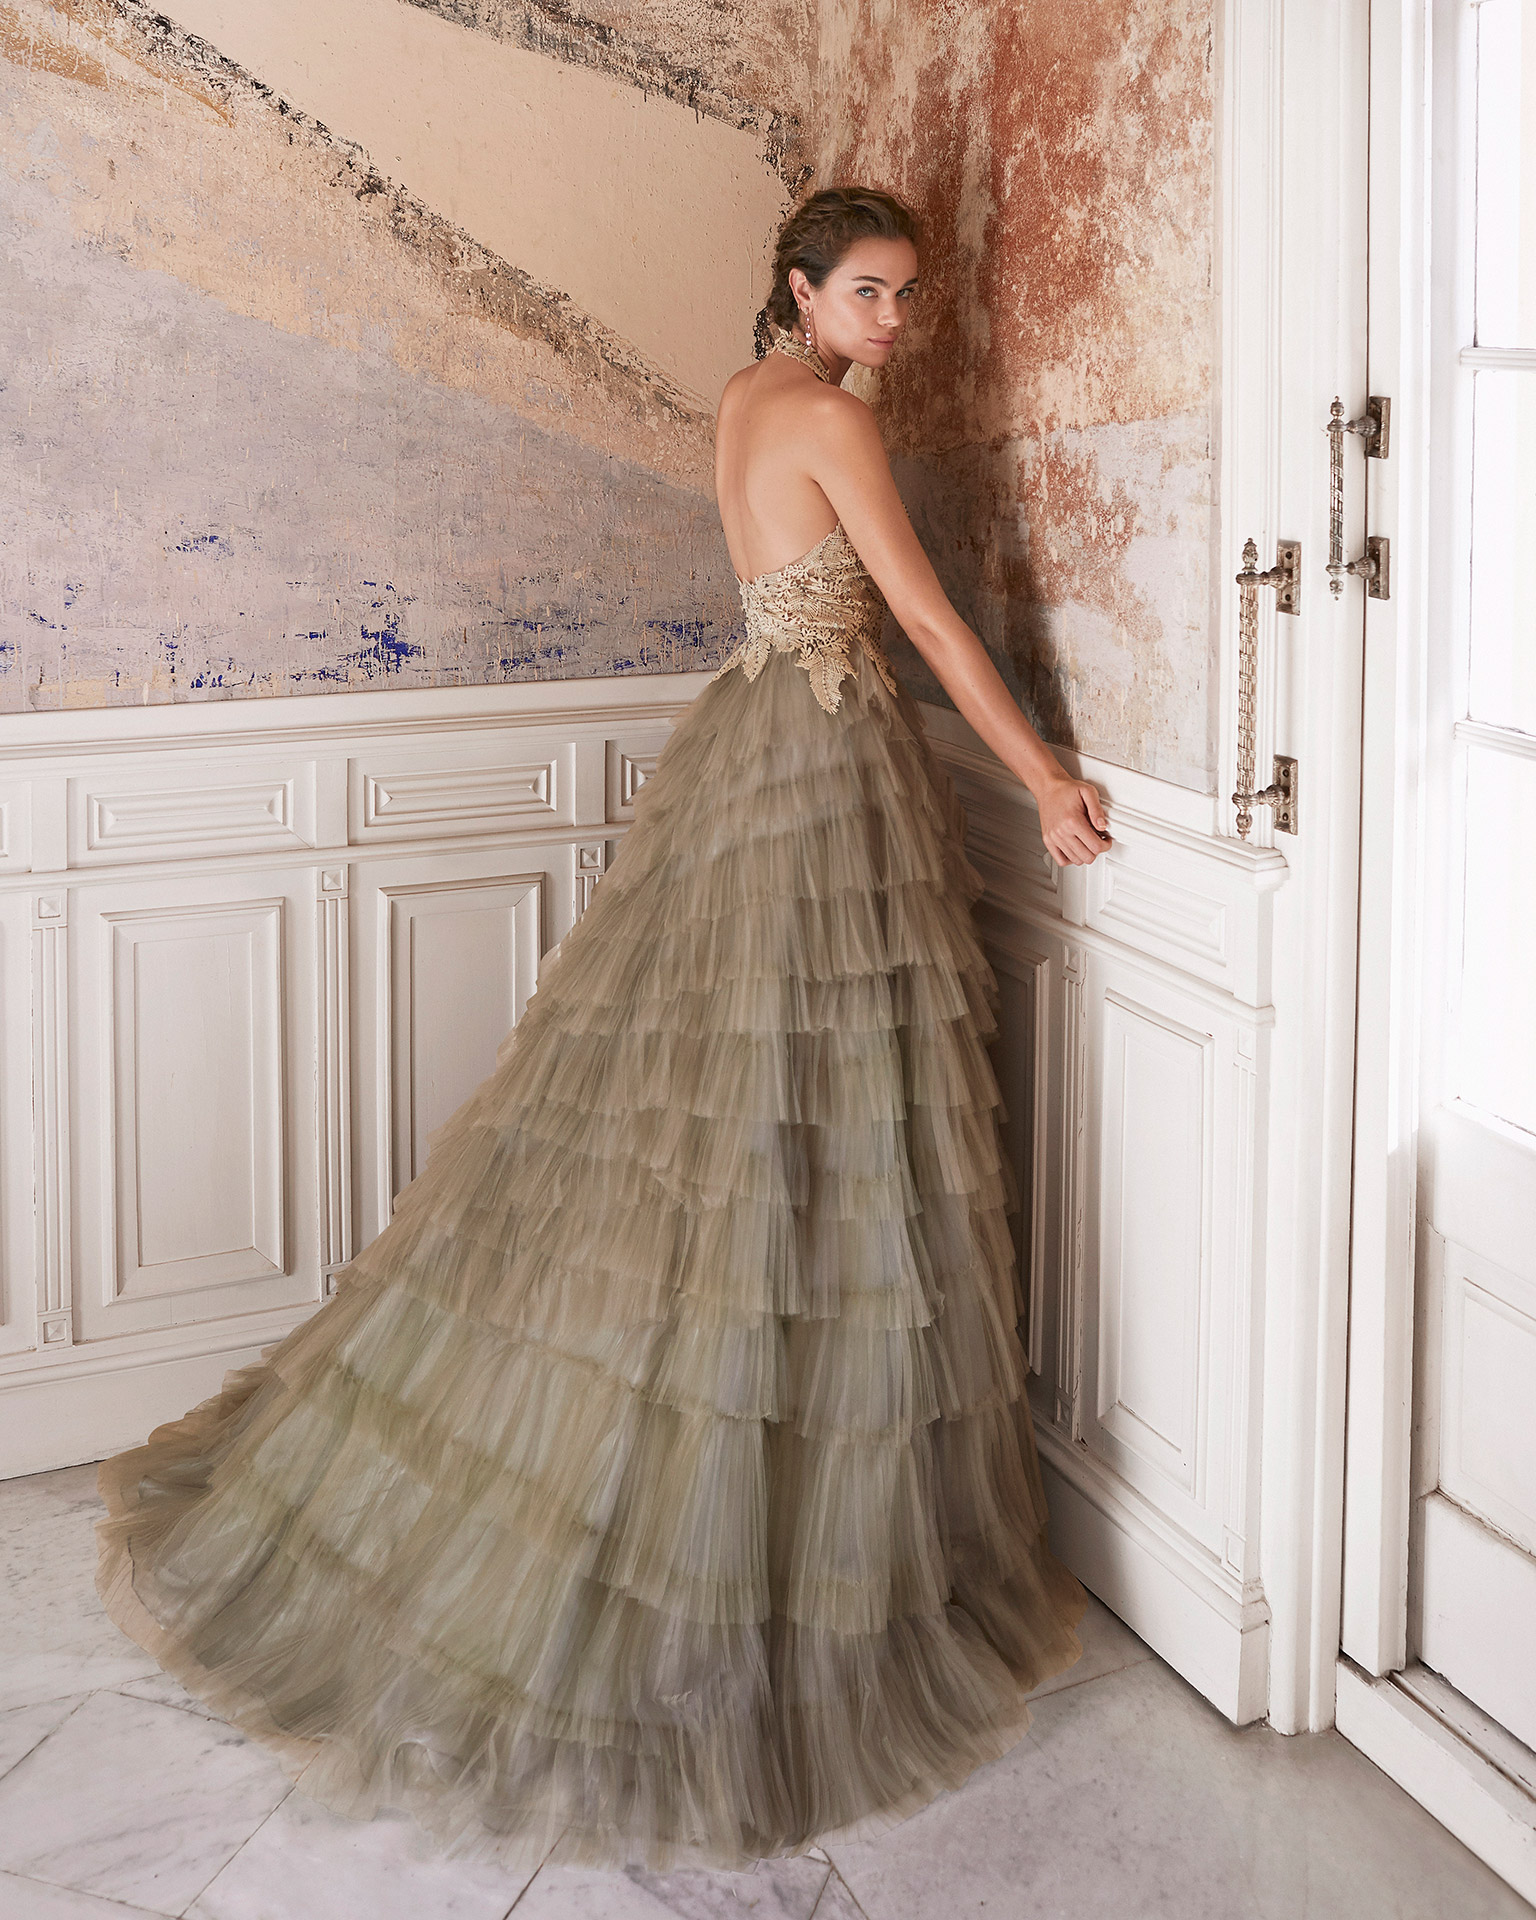 Cocktail dress in tulle with lace bodice. Deep-plunge V-neckline and low back. With shawl. 2021 MARFIL BARCELONA Collection.